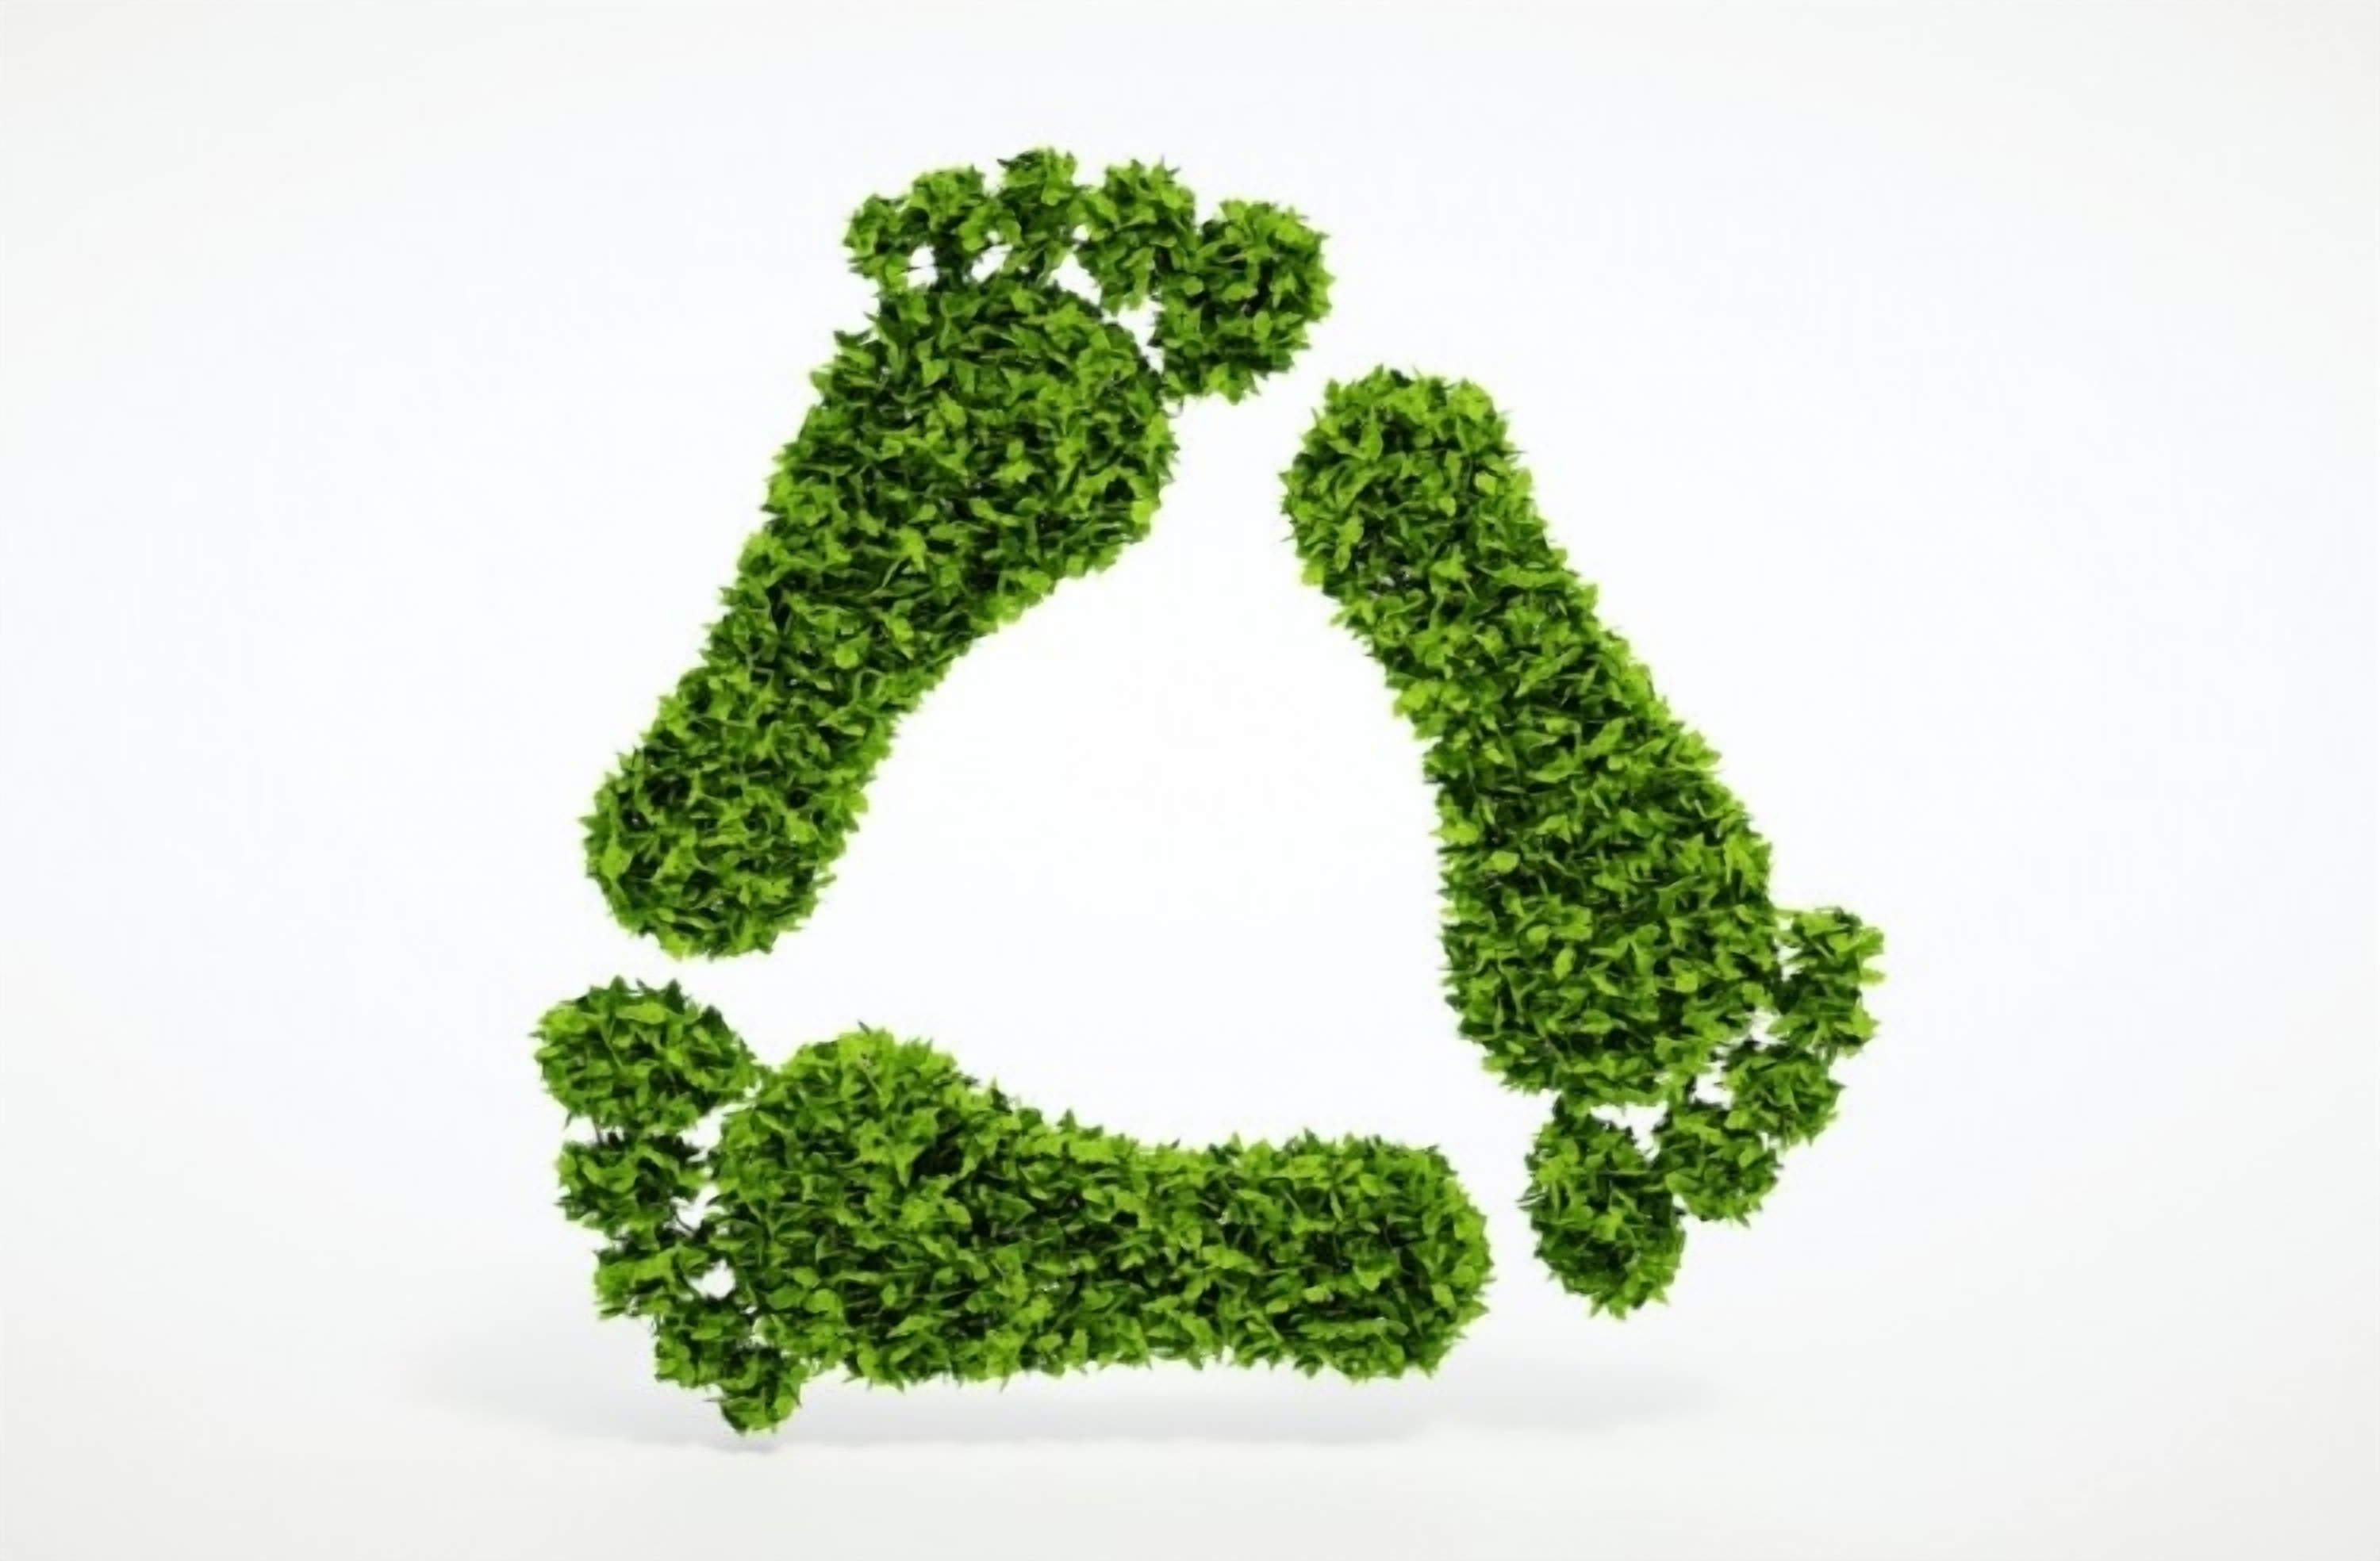 KnowESG_NSW Helps Businesses Go Green with $6 Million